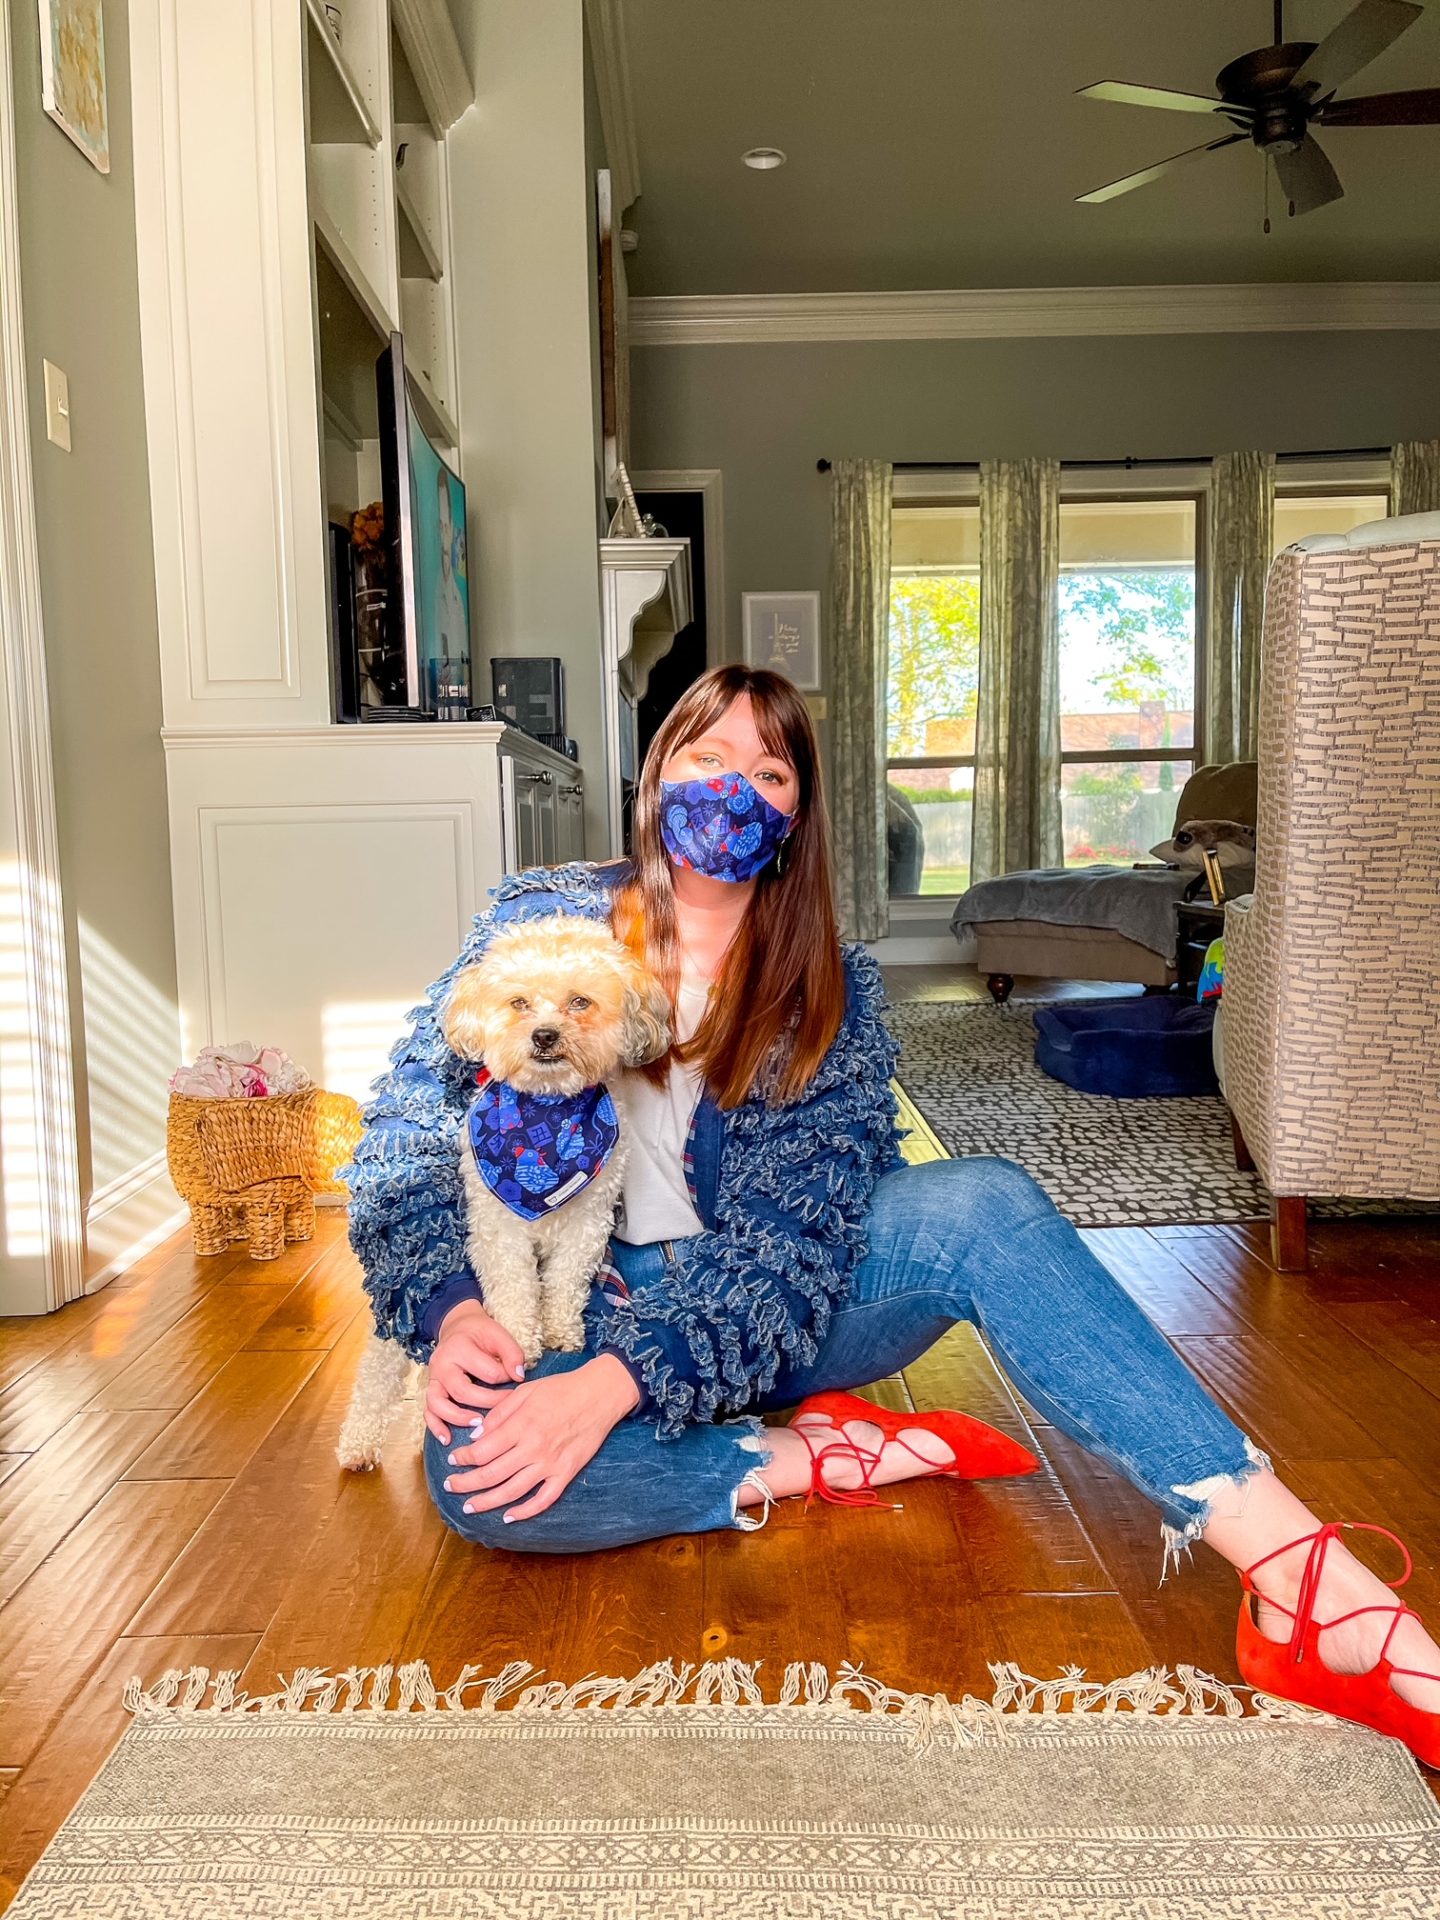 15 Women Owned Small Businesses for Pets You Need to Know About